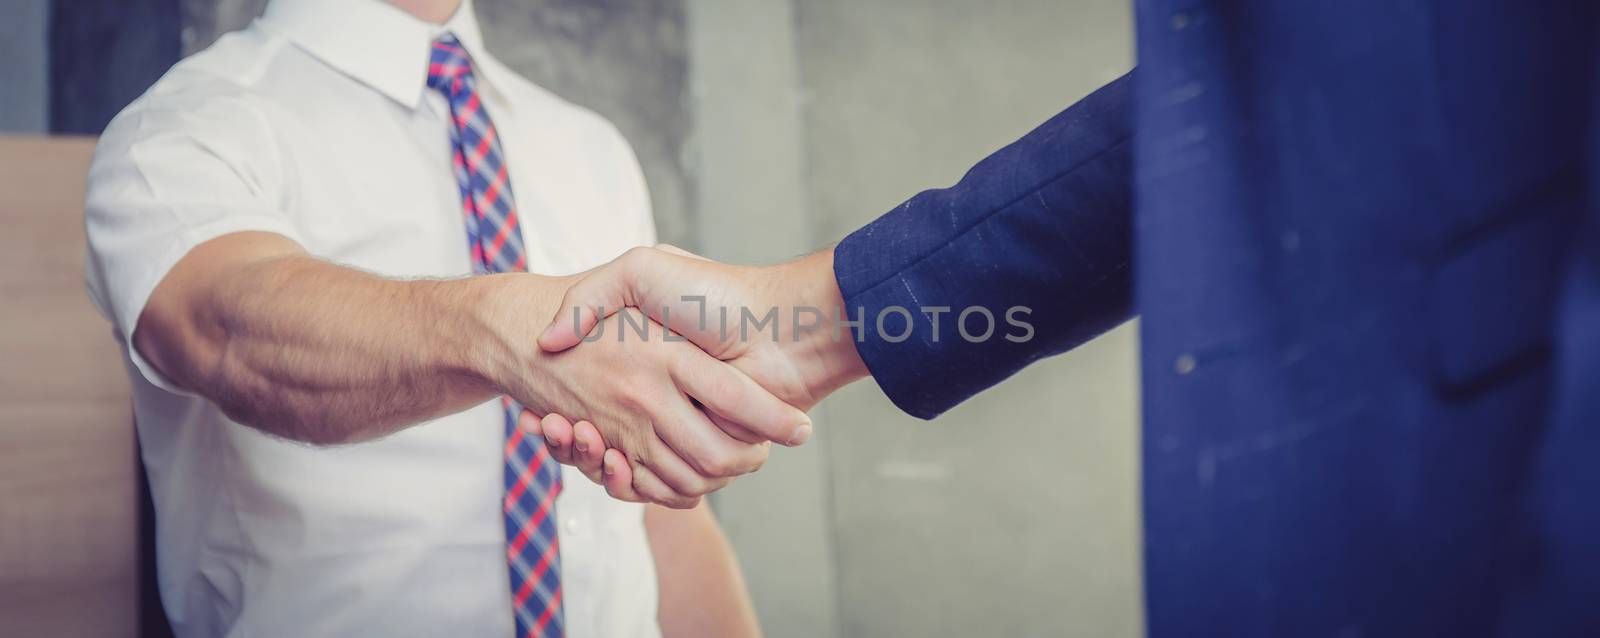 Business handshake with partner of success at the meeting room, businessman congratulation with teamwork, leader agreement of team concept, banner background.